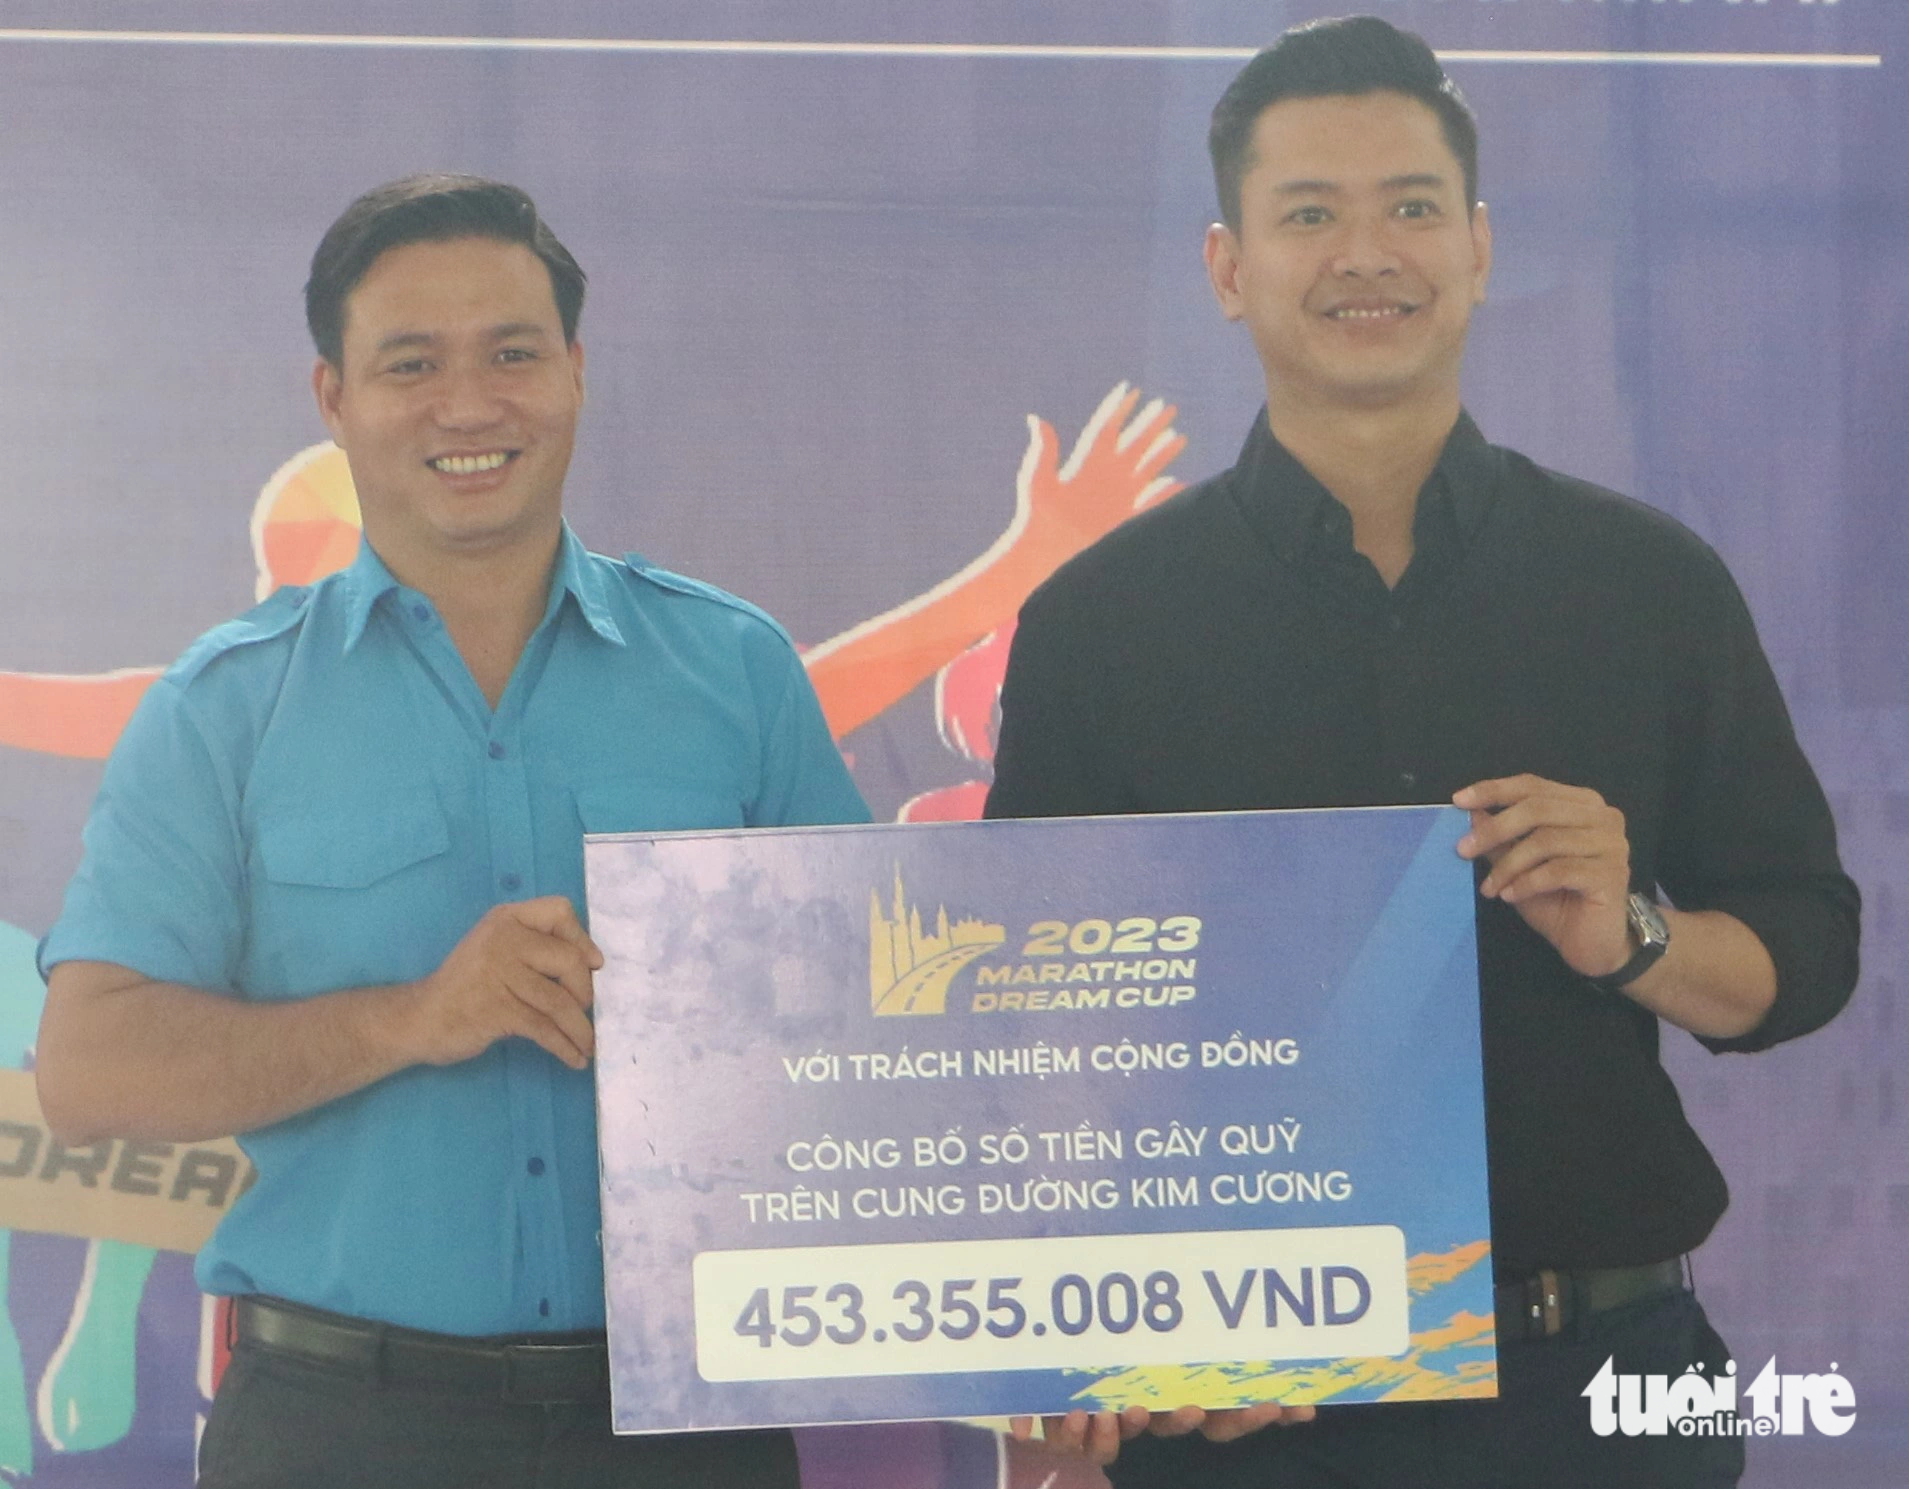 The organizer of the 2023 Marathon Dream Cup hand over a fund of more than VND453 million (US$19,126) from the race’s registration fee, Ho Chi Minh City, July 30, 2023. Photo: Binh Minh / Tuoi Tre